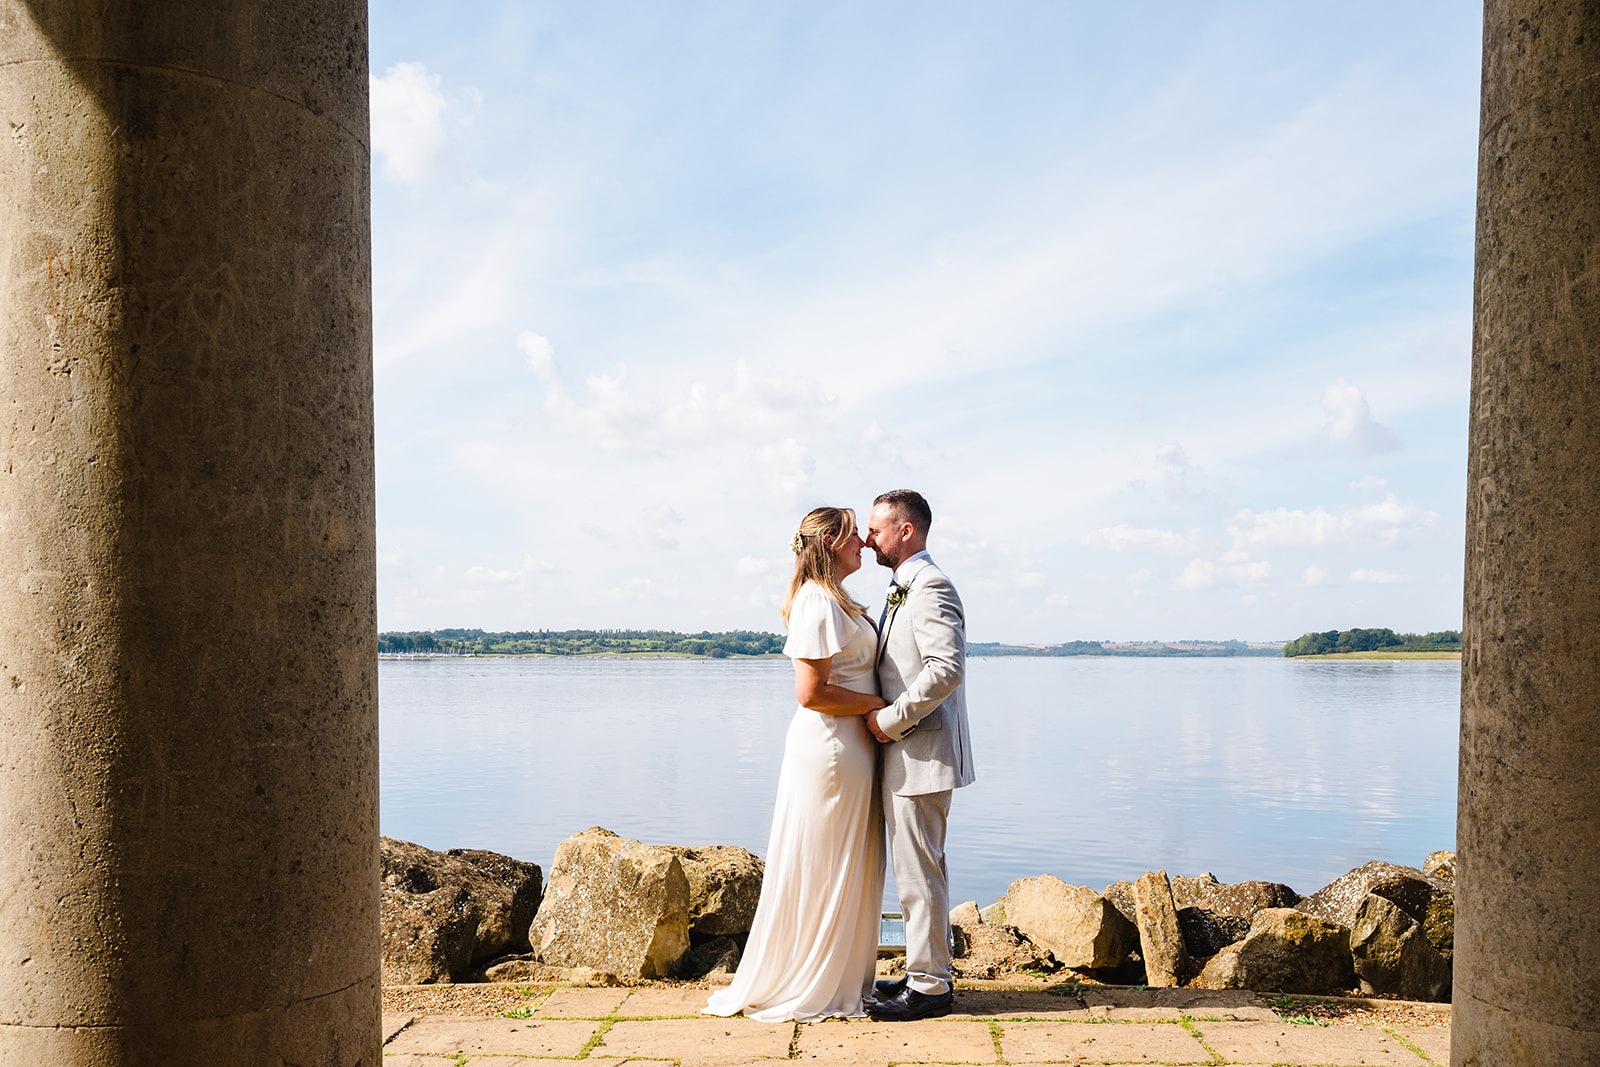 Bride and groom wedding portraits captured by Amanda Forman Photography at Normanton Church